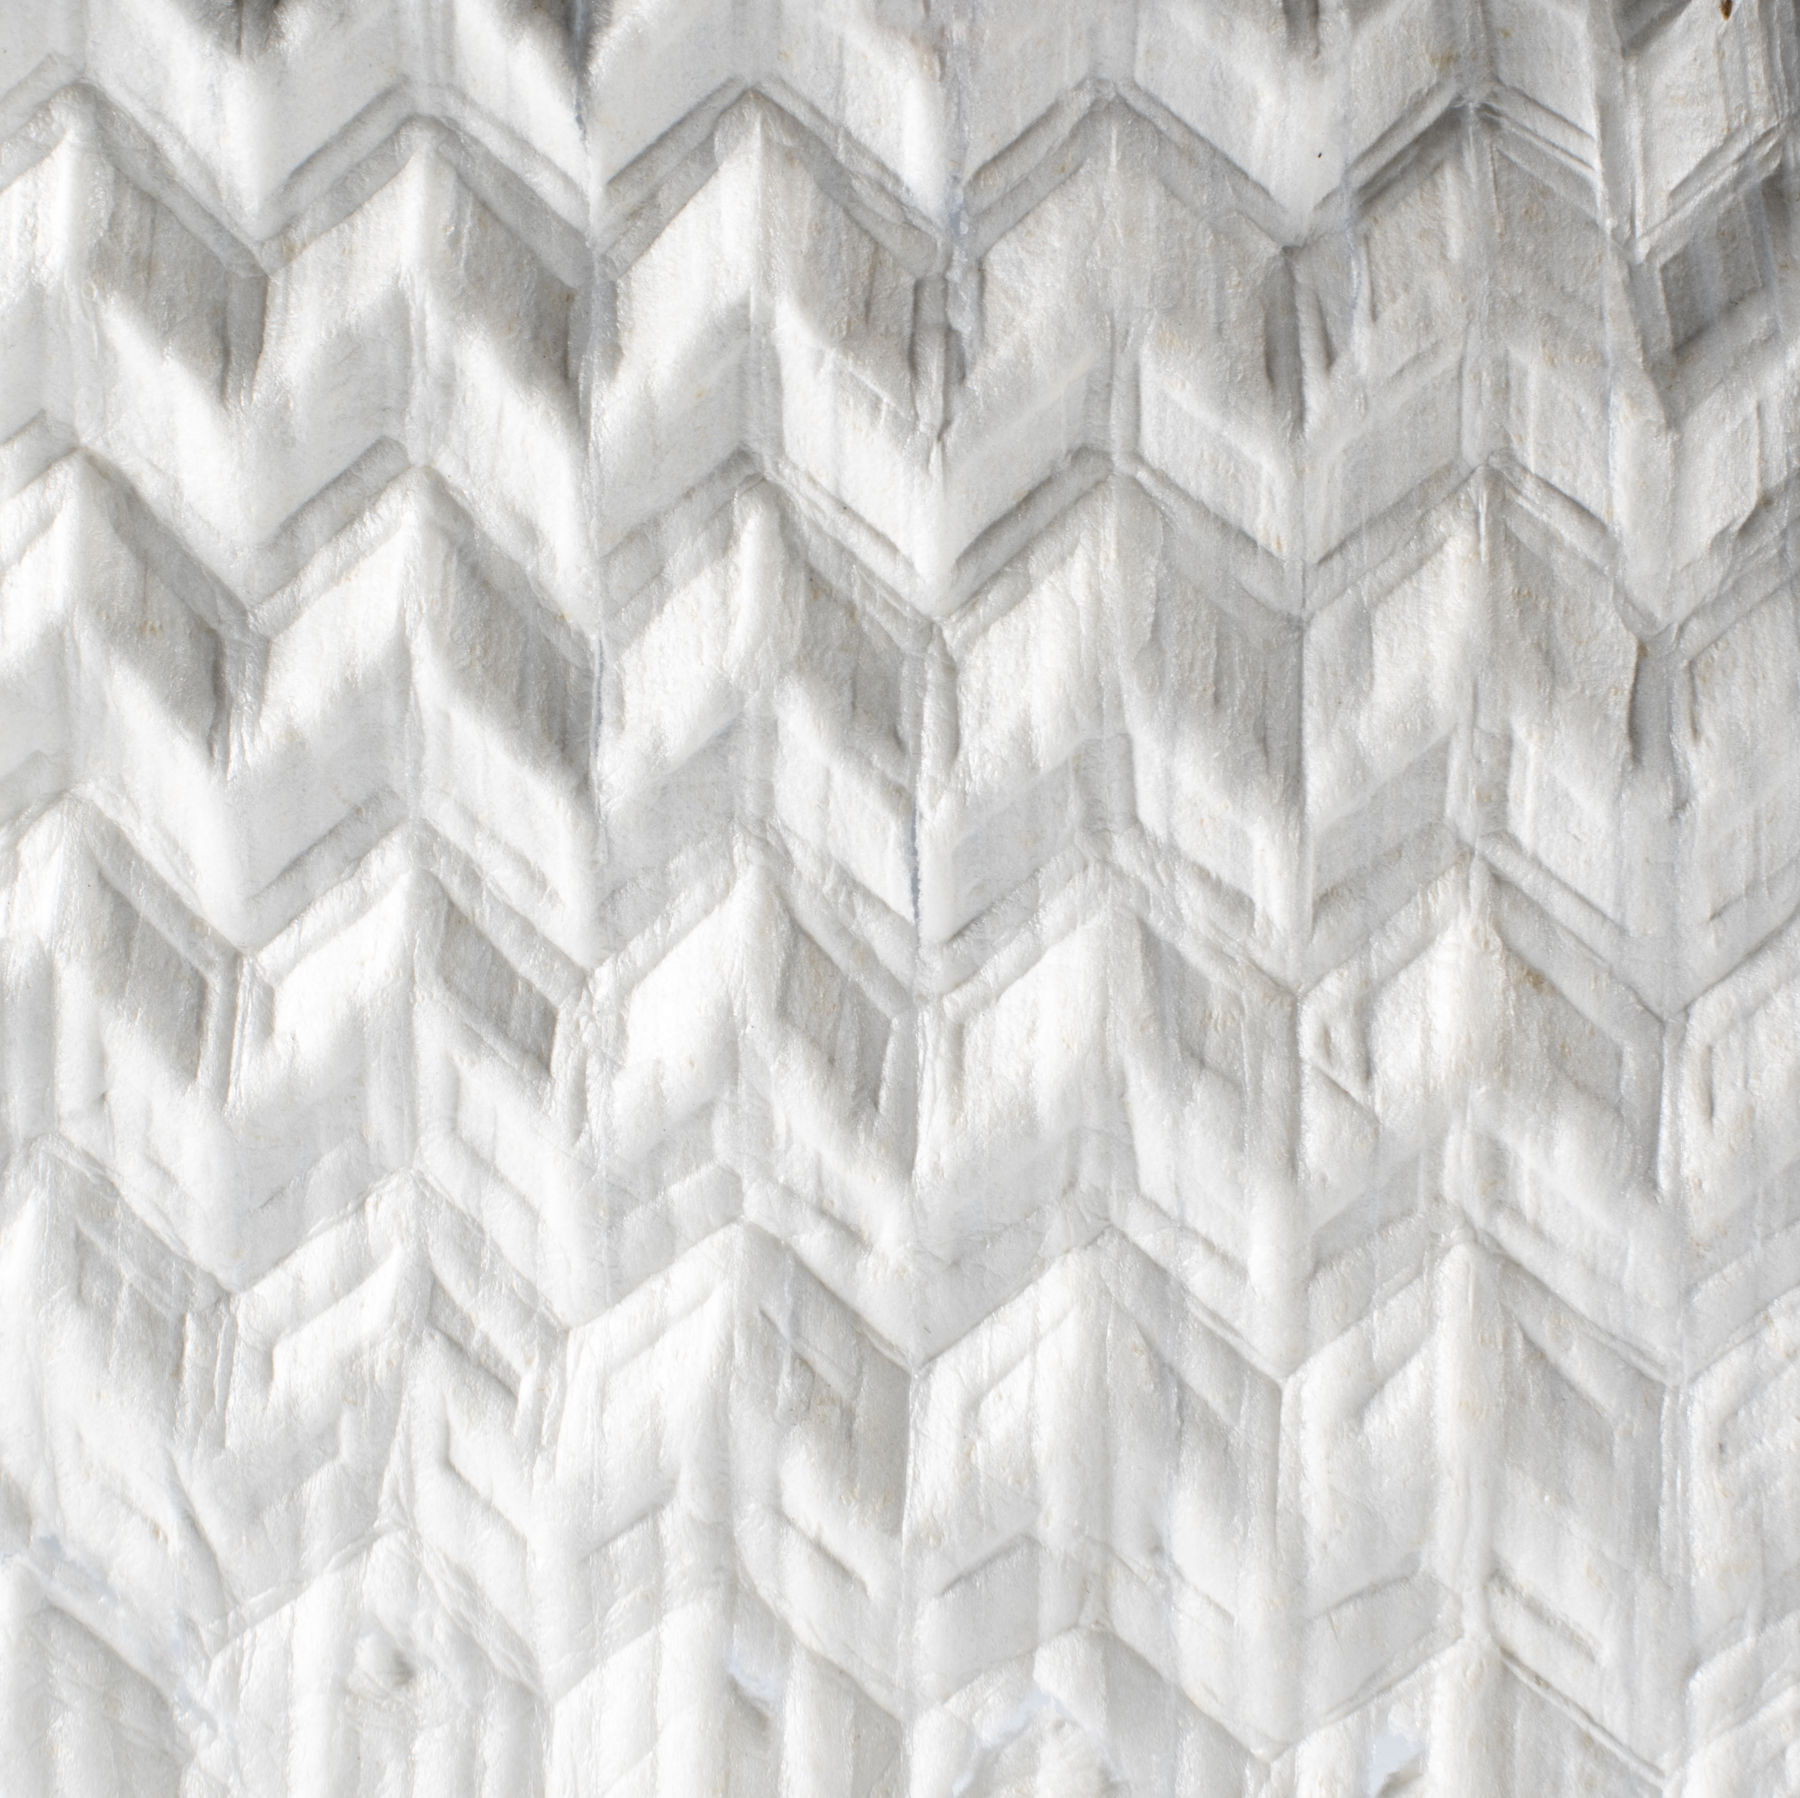 Close-up of a biofoam acoustic panel.